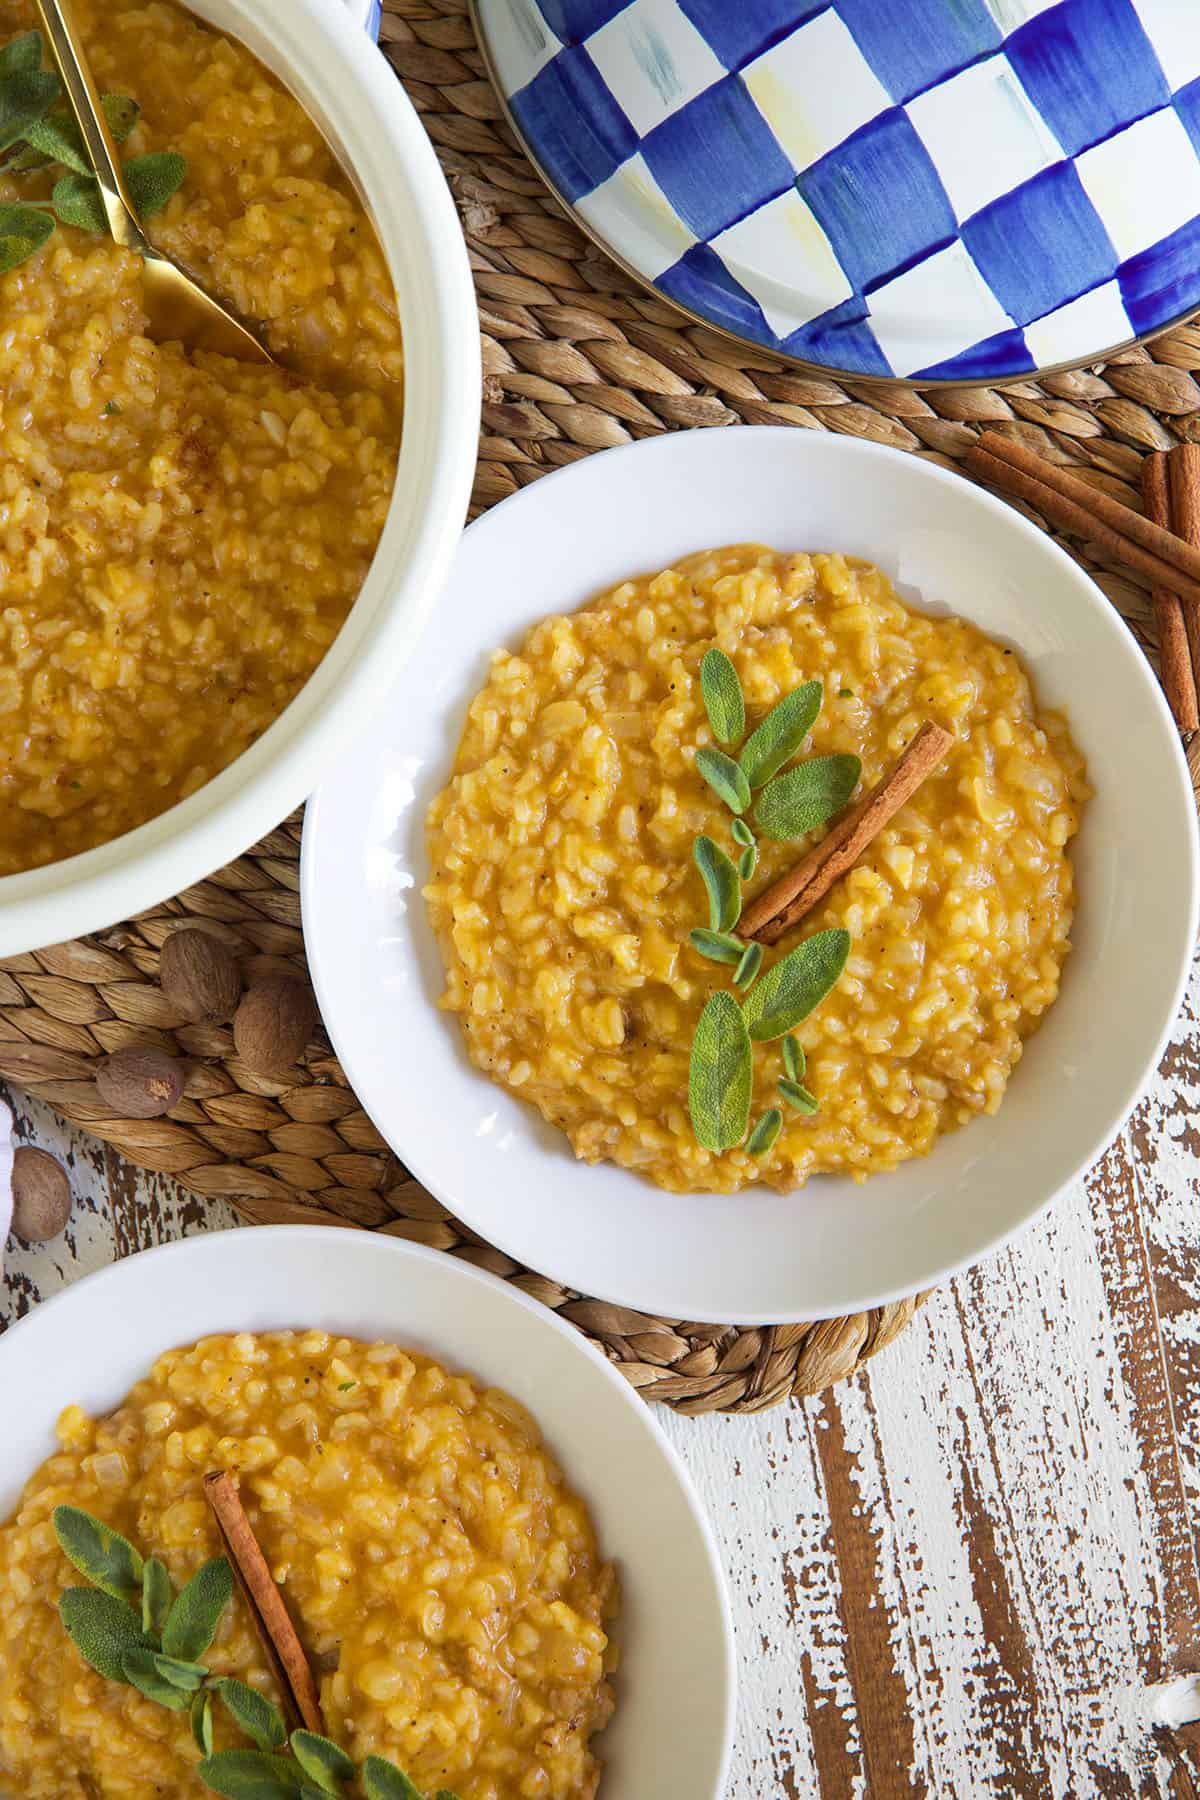 Two bowls of risotto are placed next to a large serving bowl.